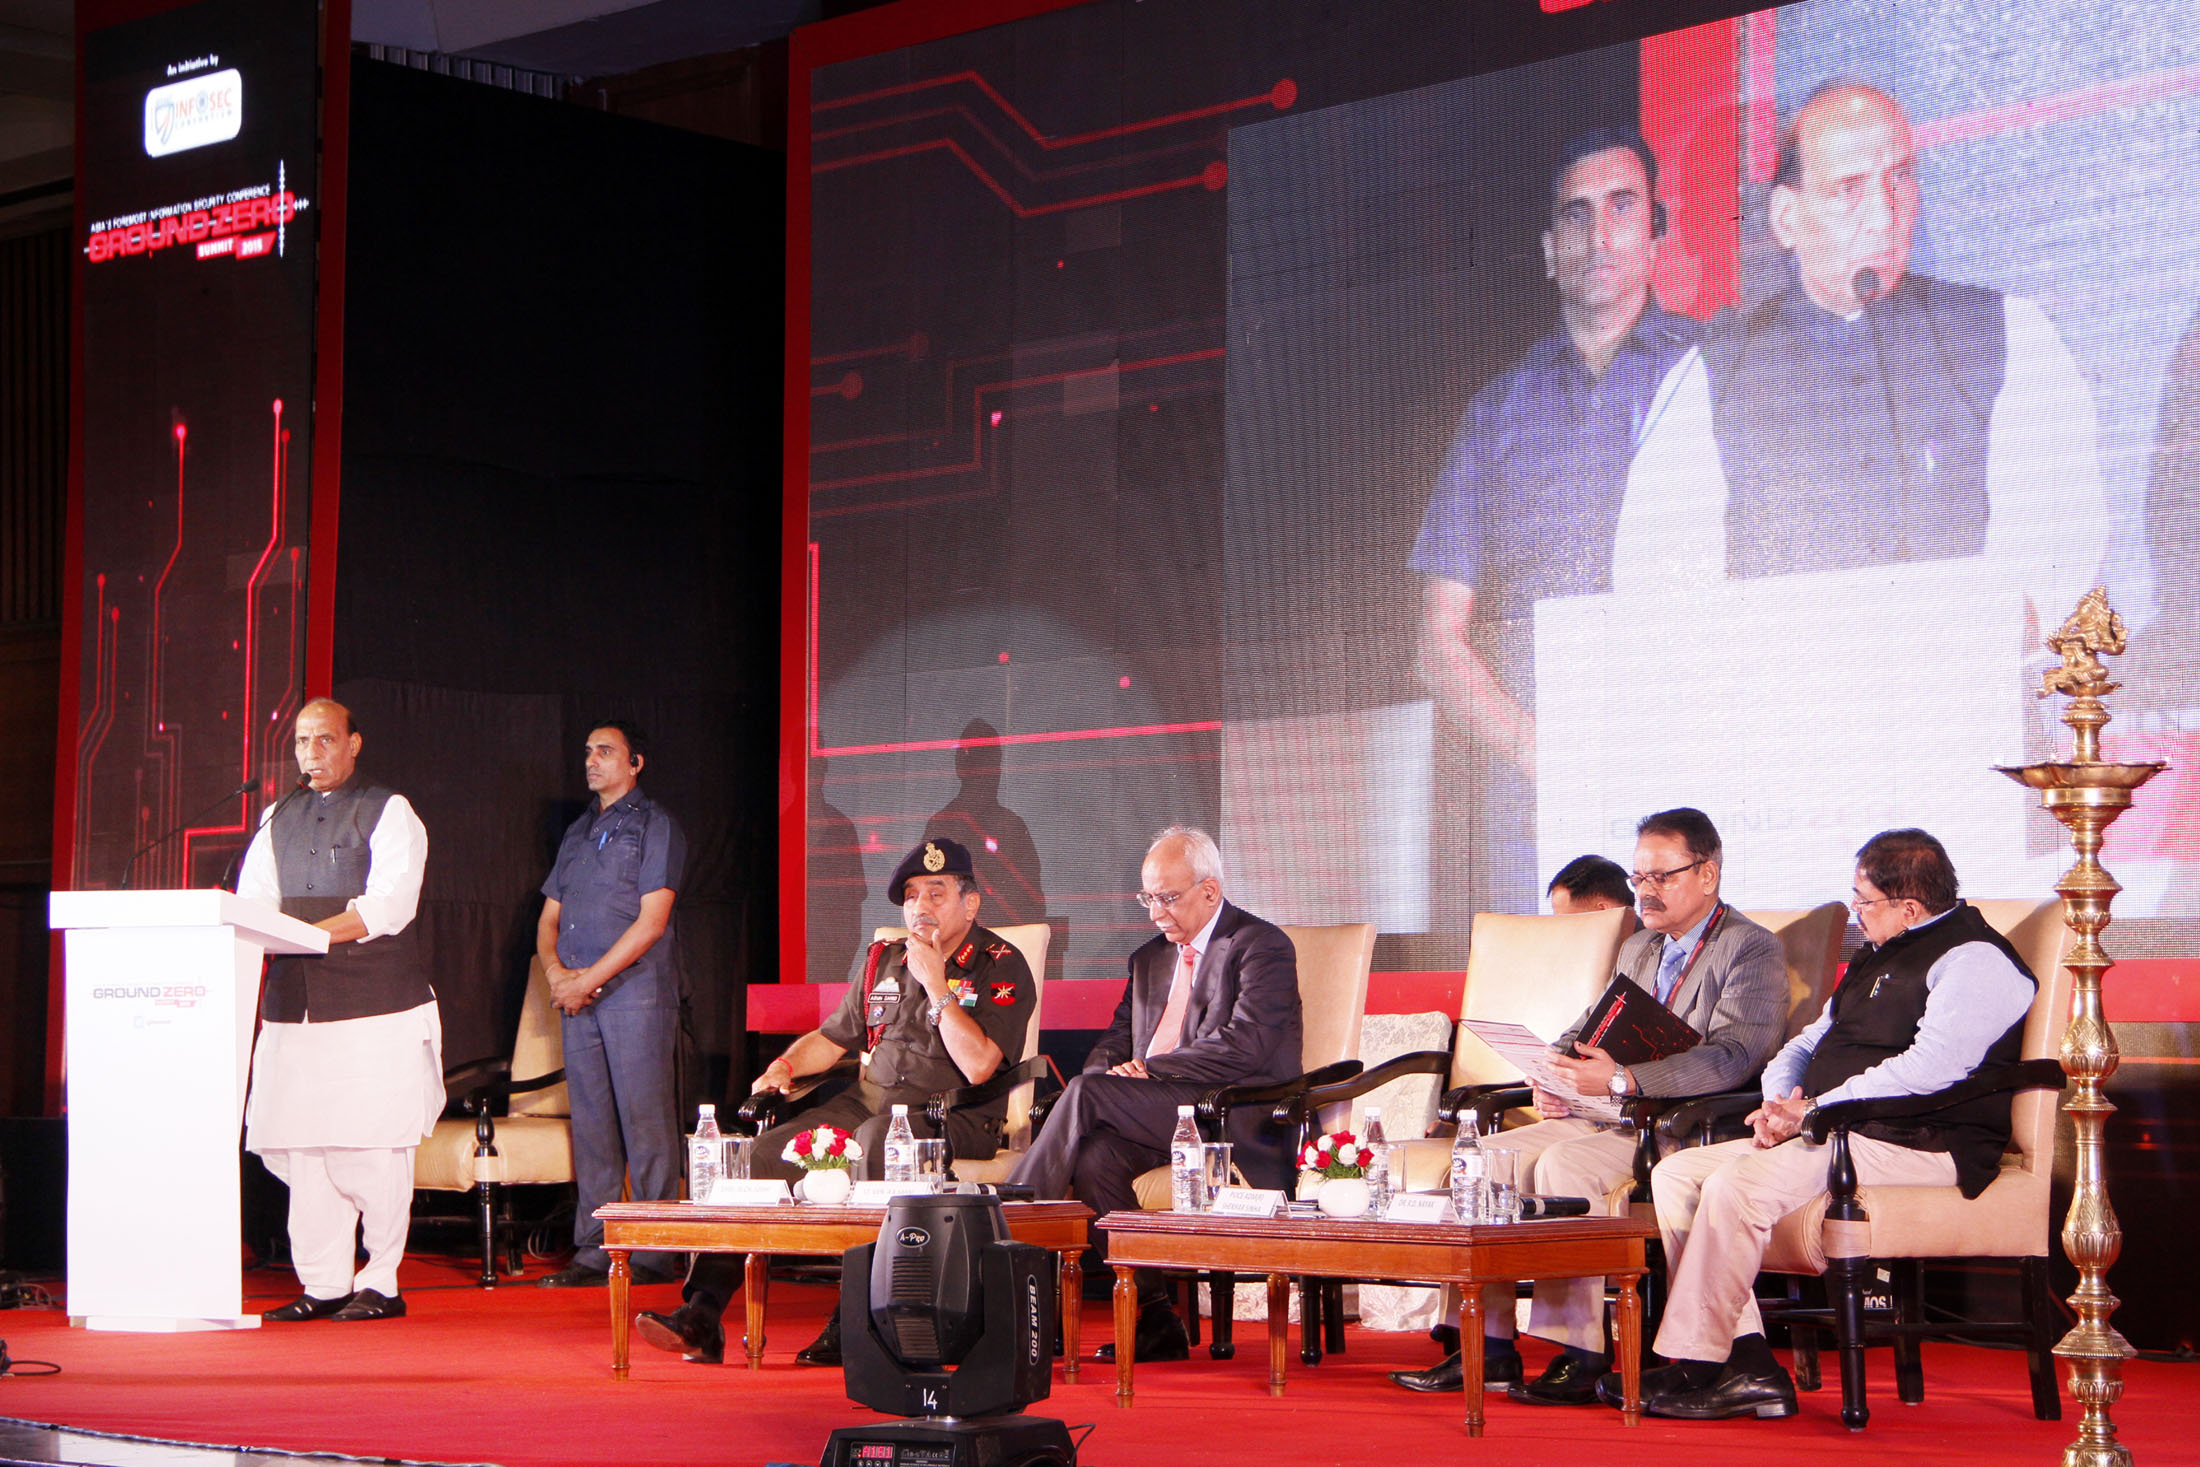 The Union Home Minister, Shri Rajnath Singh addressing the inaugural session of the 4-day Ground Zero Summit-2015', Asia's foremost Information Security Conference, in New Delhi on November 05, 2015.